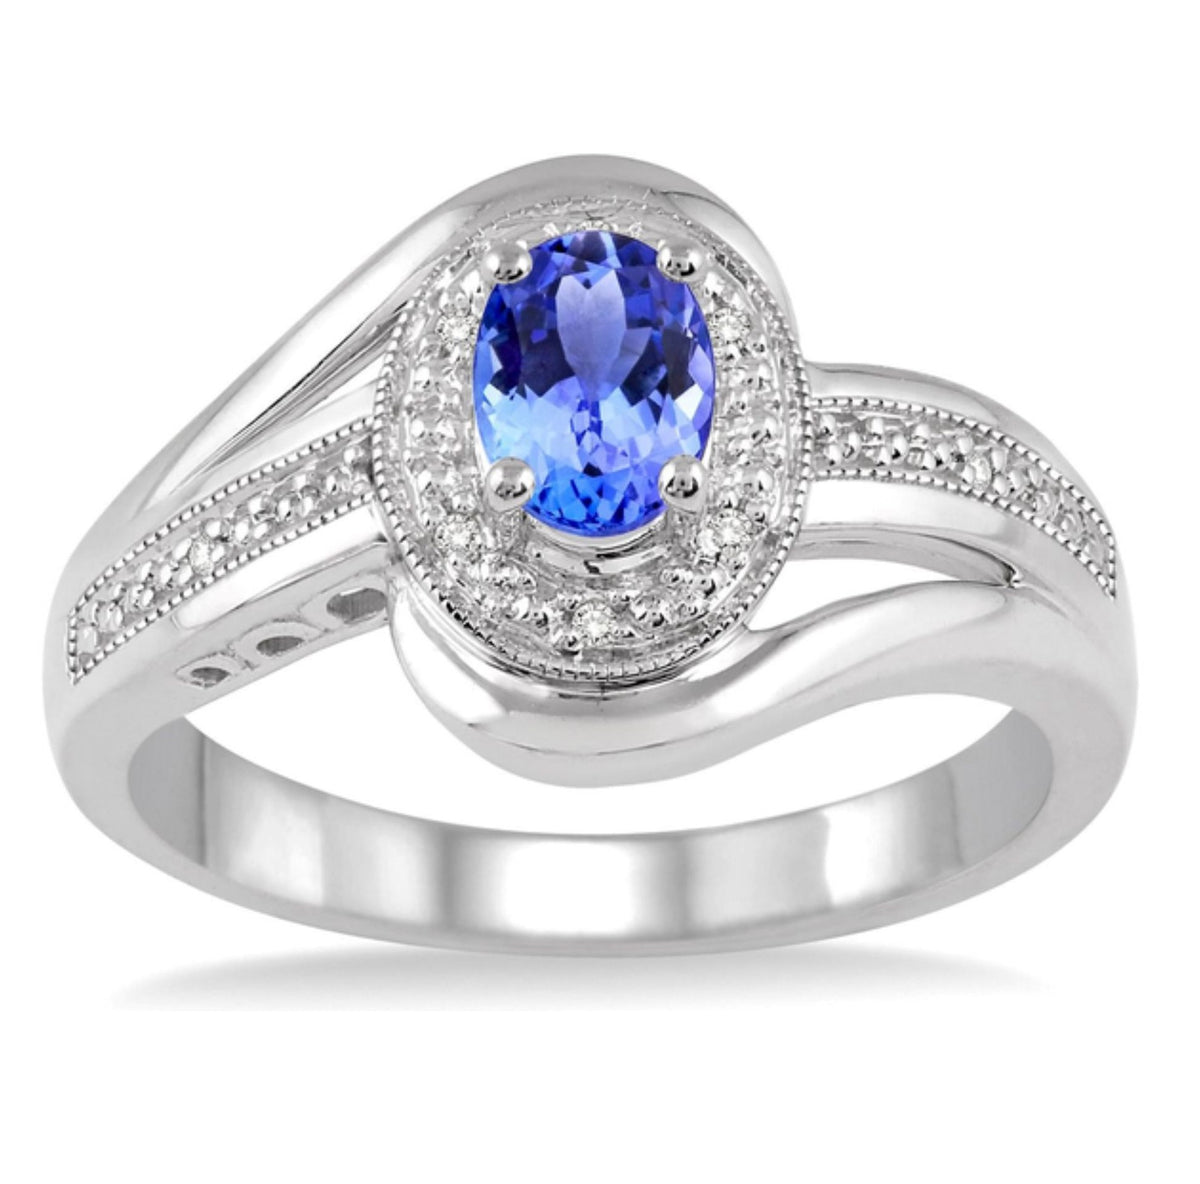 Sterling Silver Oval Tanzanite Ring with Diamond Accents